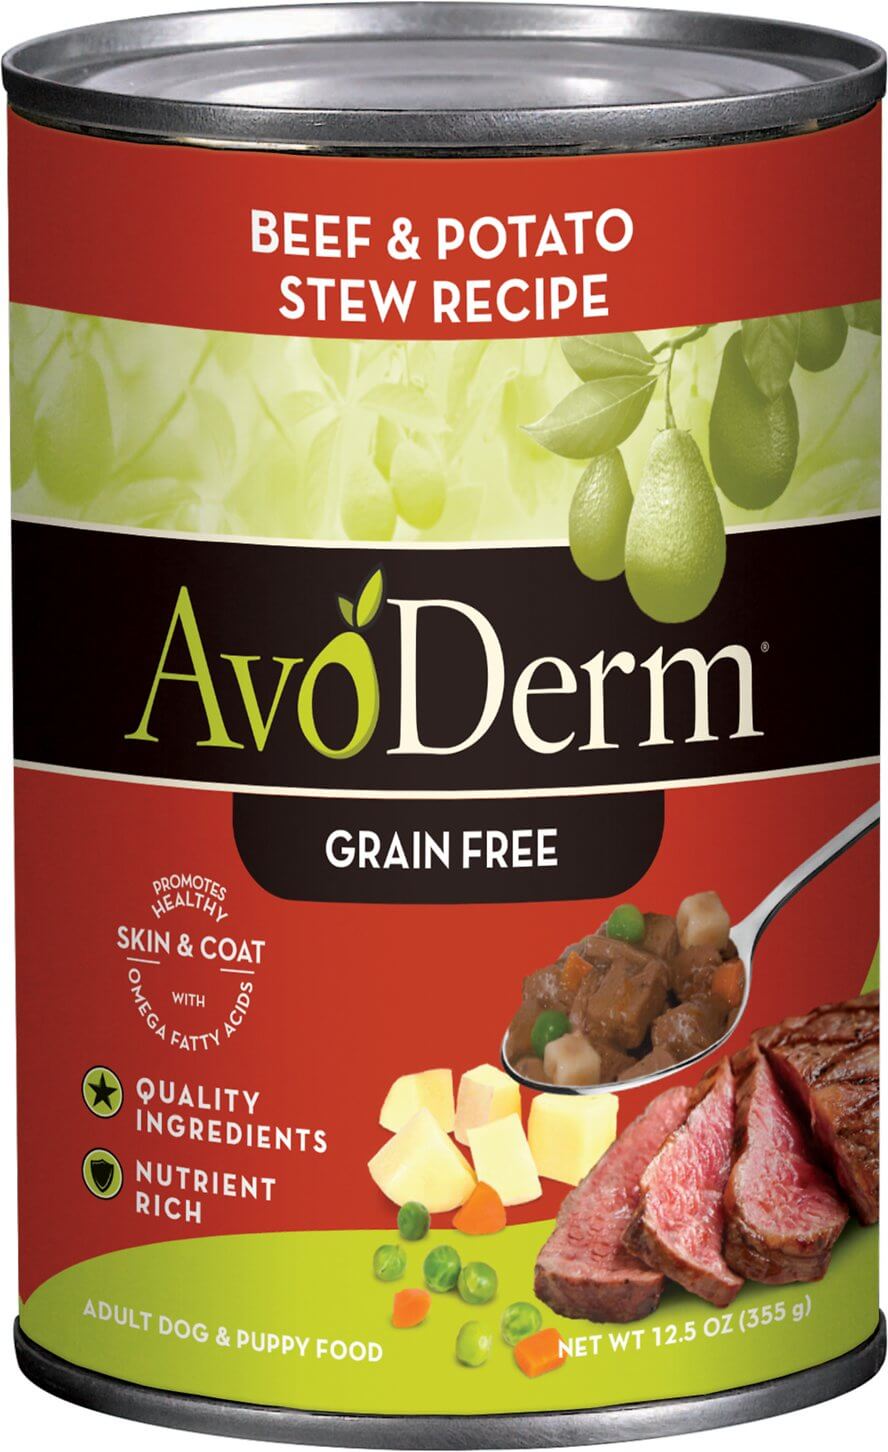 AvoDerm Natural Grain Free Dog Food Review (Canned)